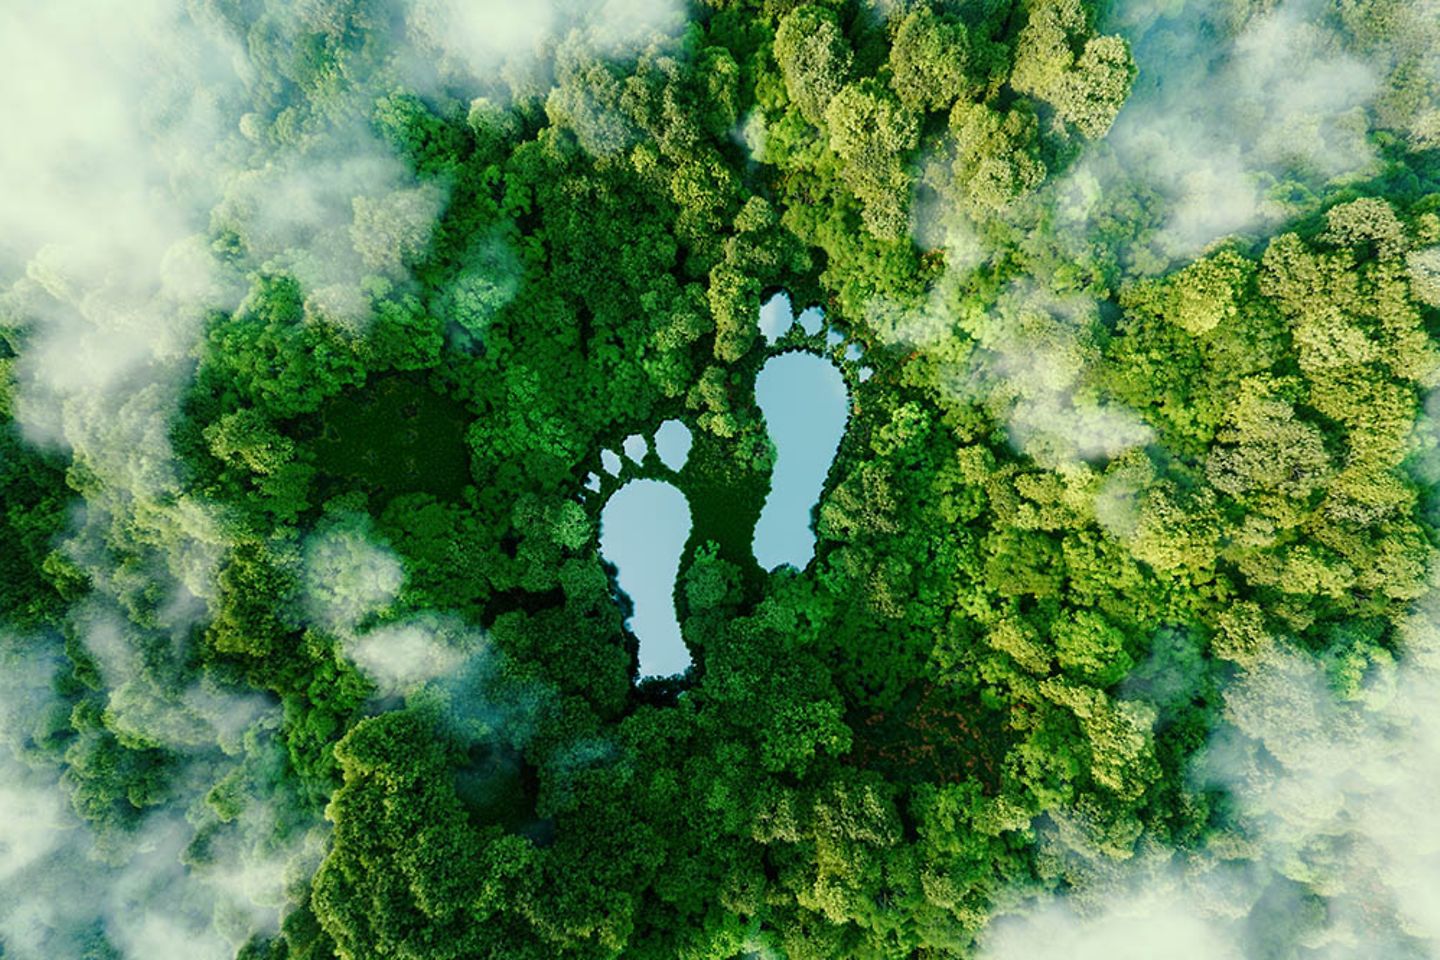 Lakes in the form of footprints in a dense forest